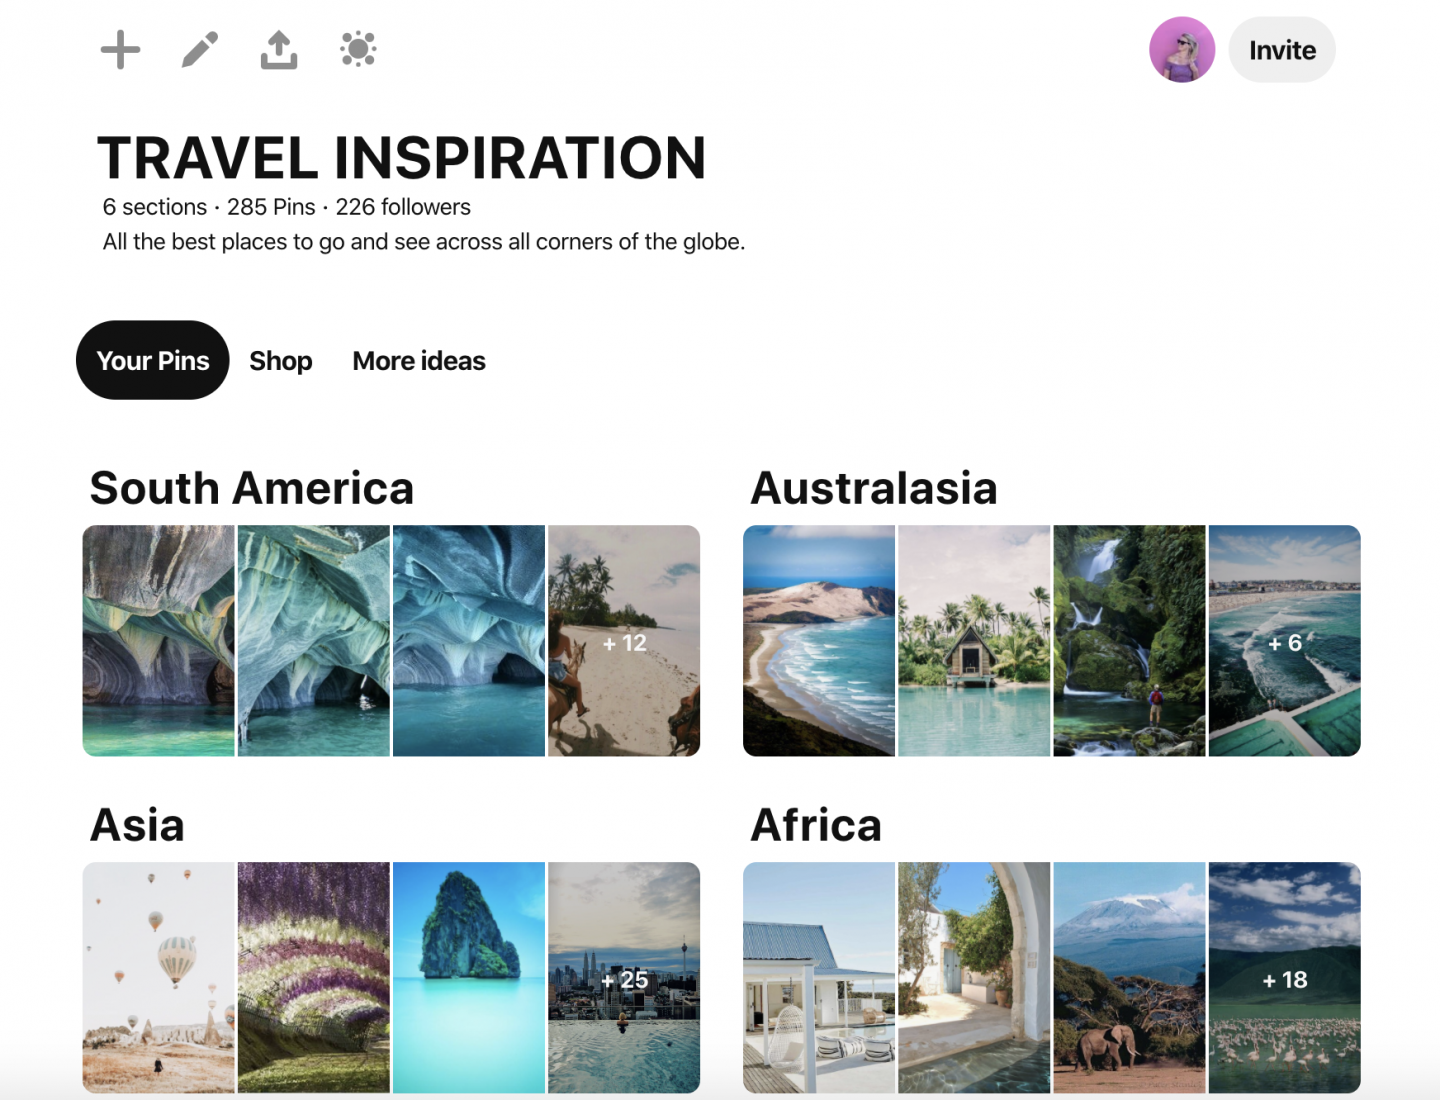 How to get travel inspiration during Covid-19: Pinterest